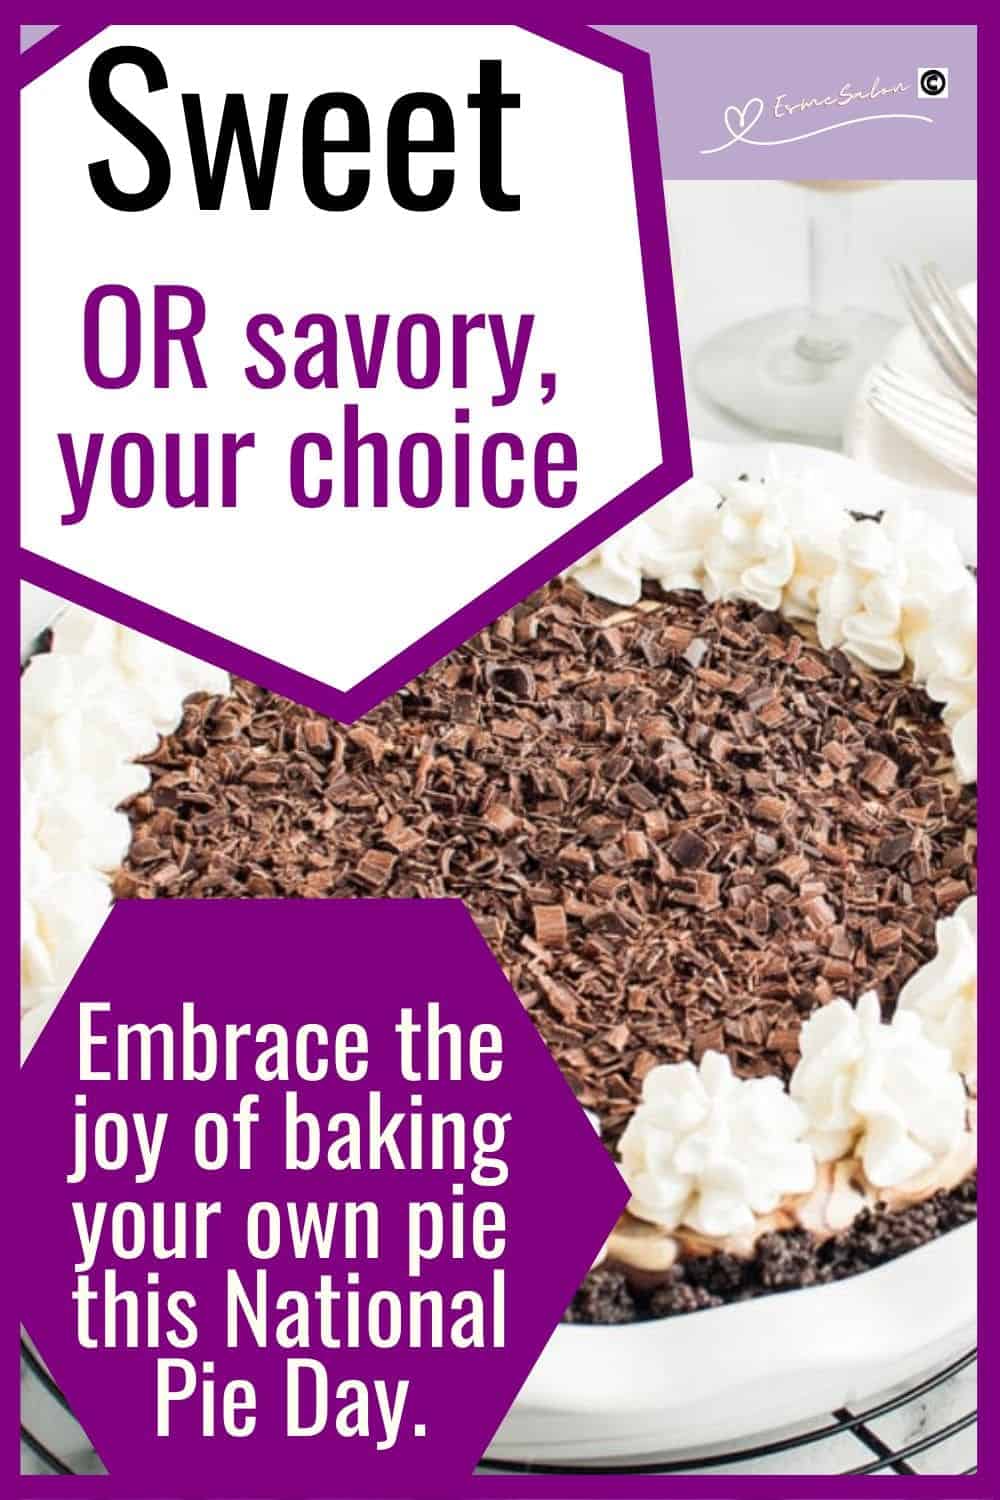 Sweet or savory, your choice. Embrace the joy of baking your own pie this National Pie Day